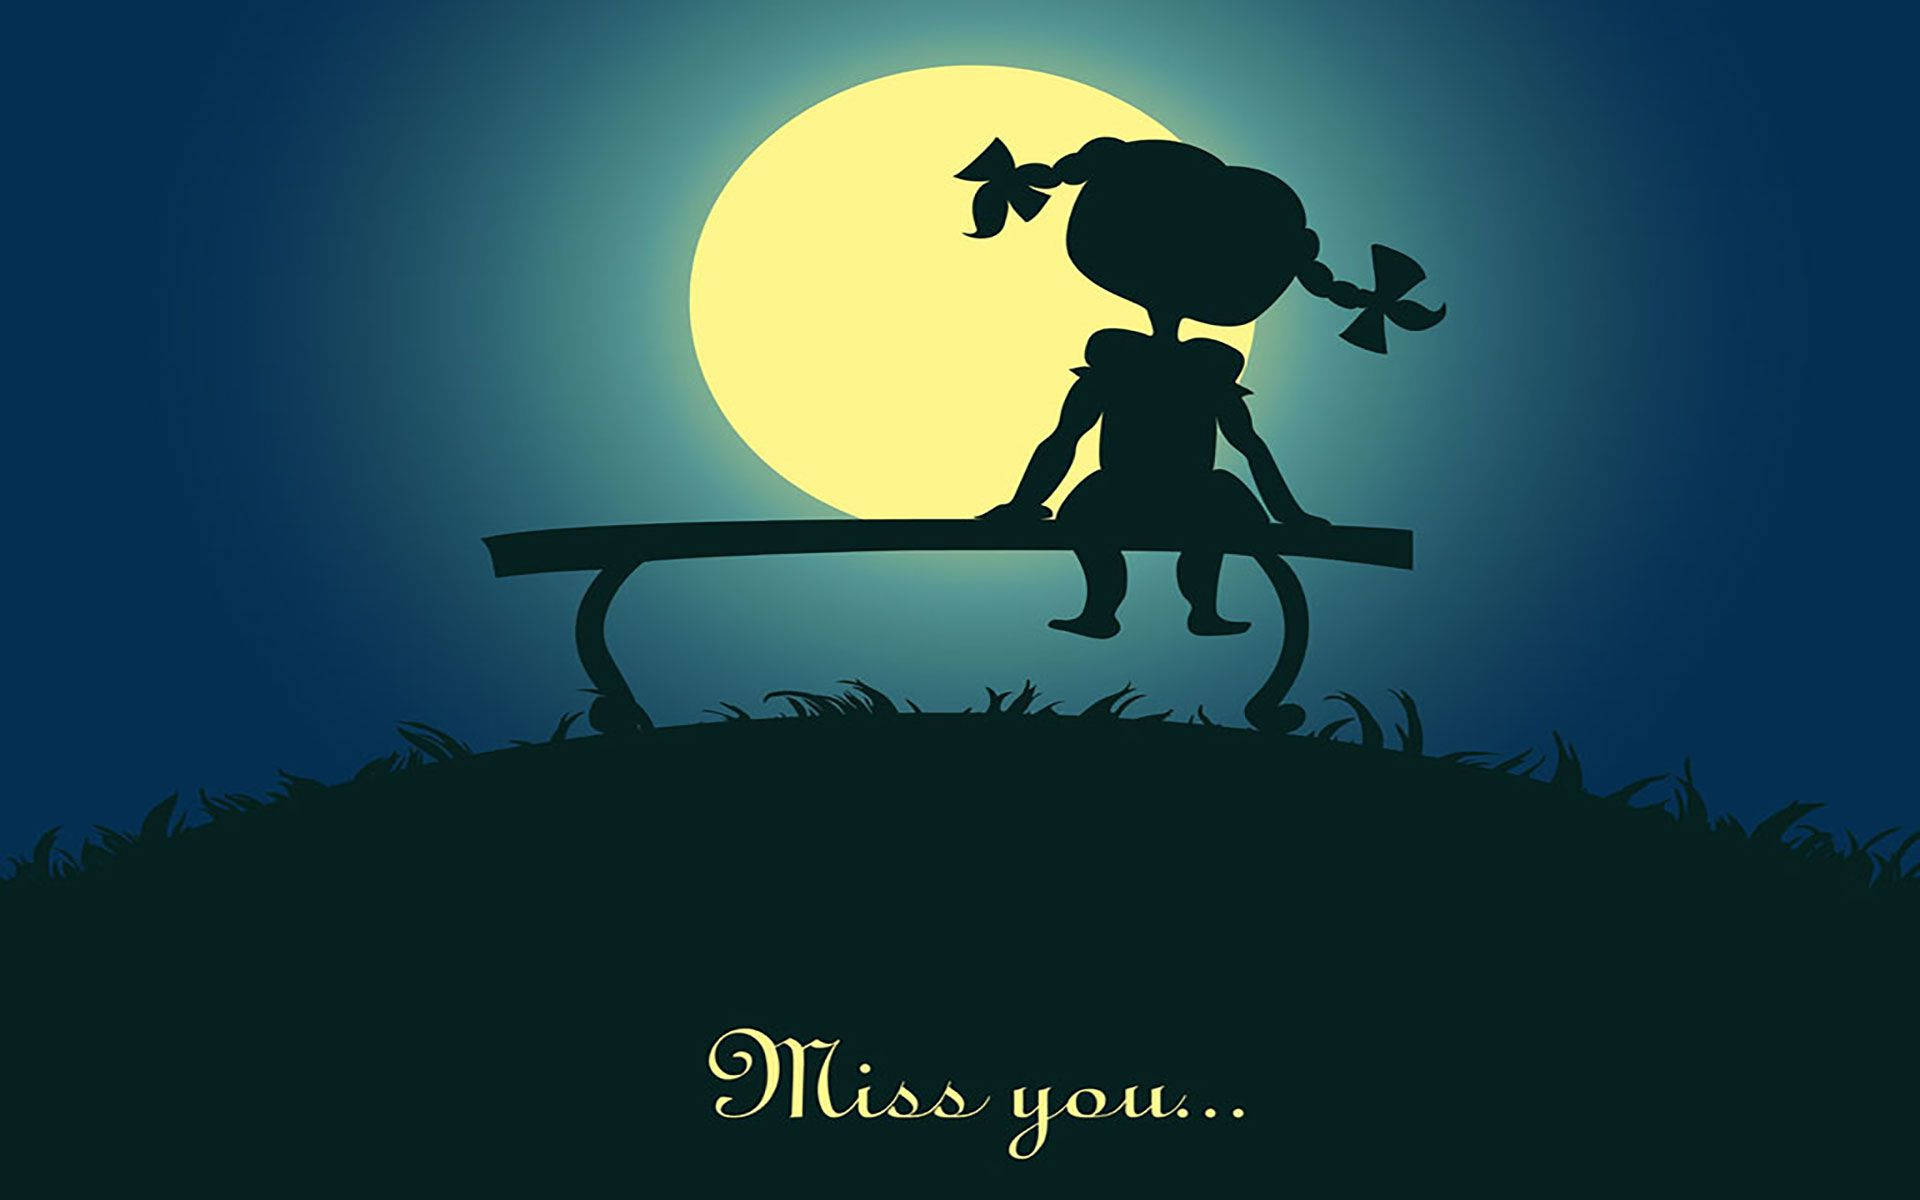 Missing You Cartoon Silhouette Wallpaper